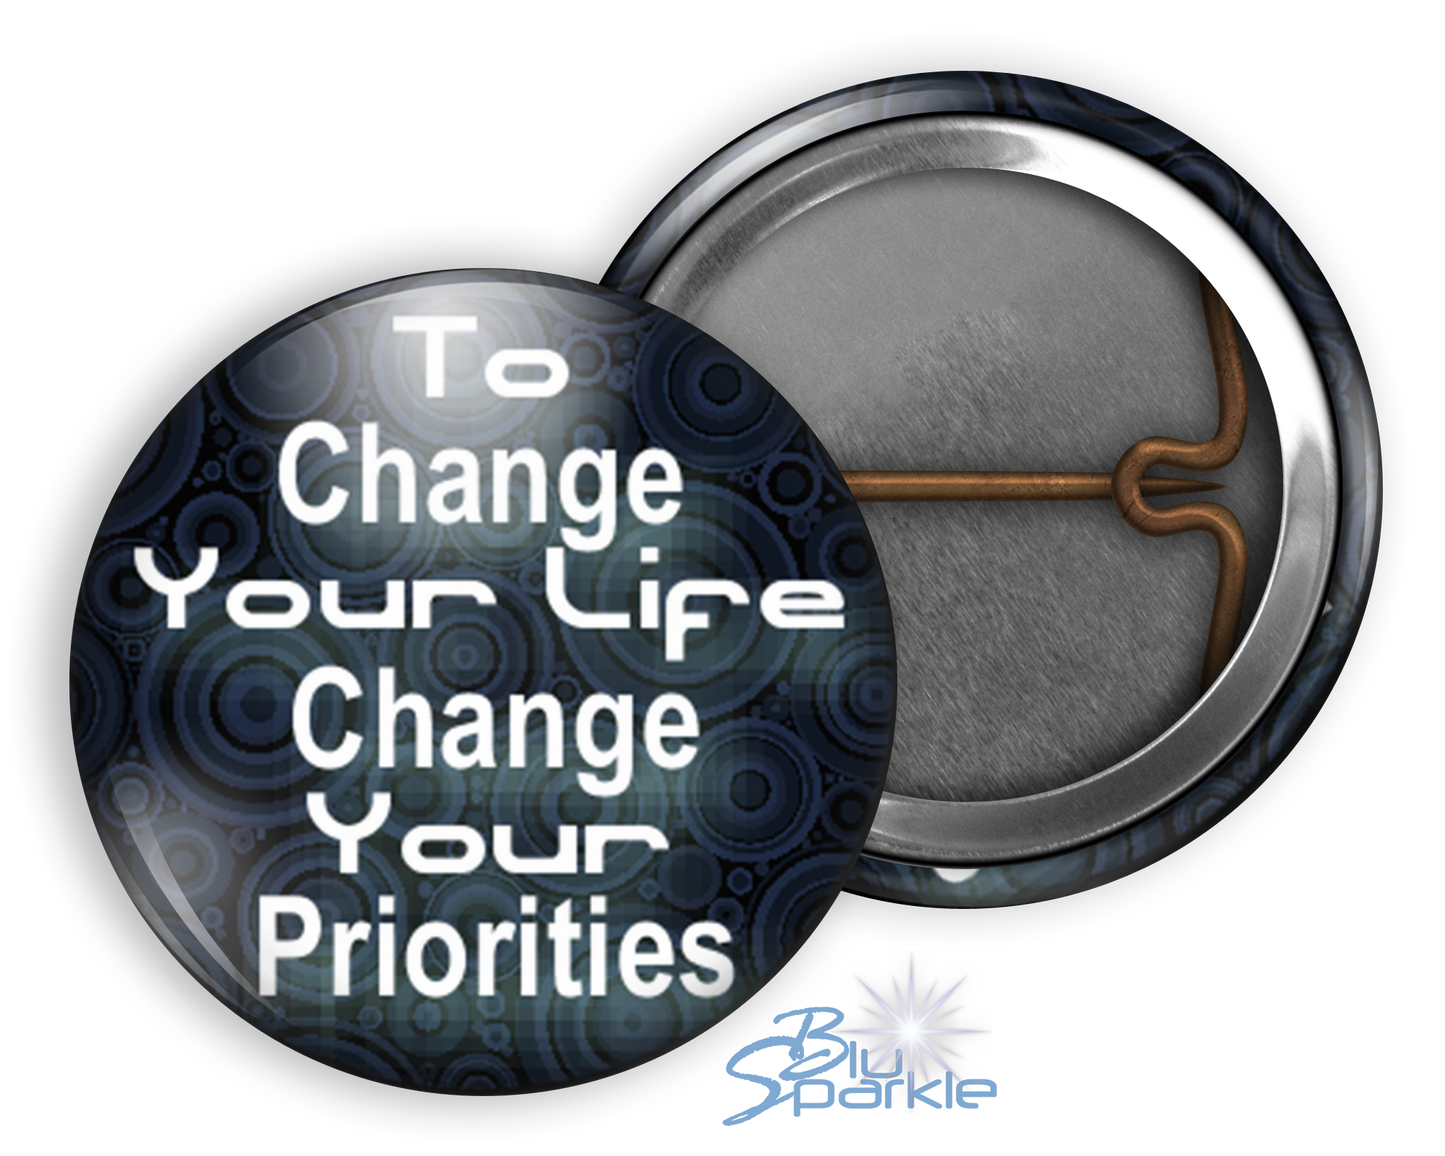 To Change Your Life, Change Your Priorities - Pinback Buttons